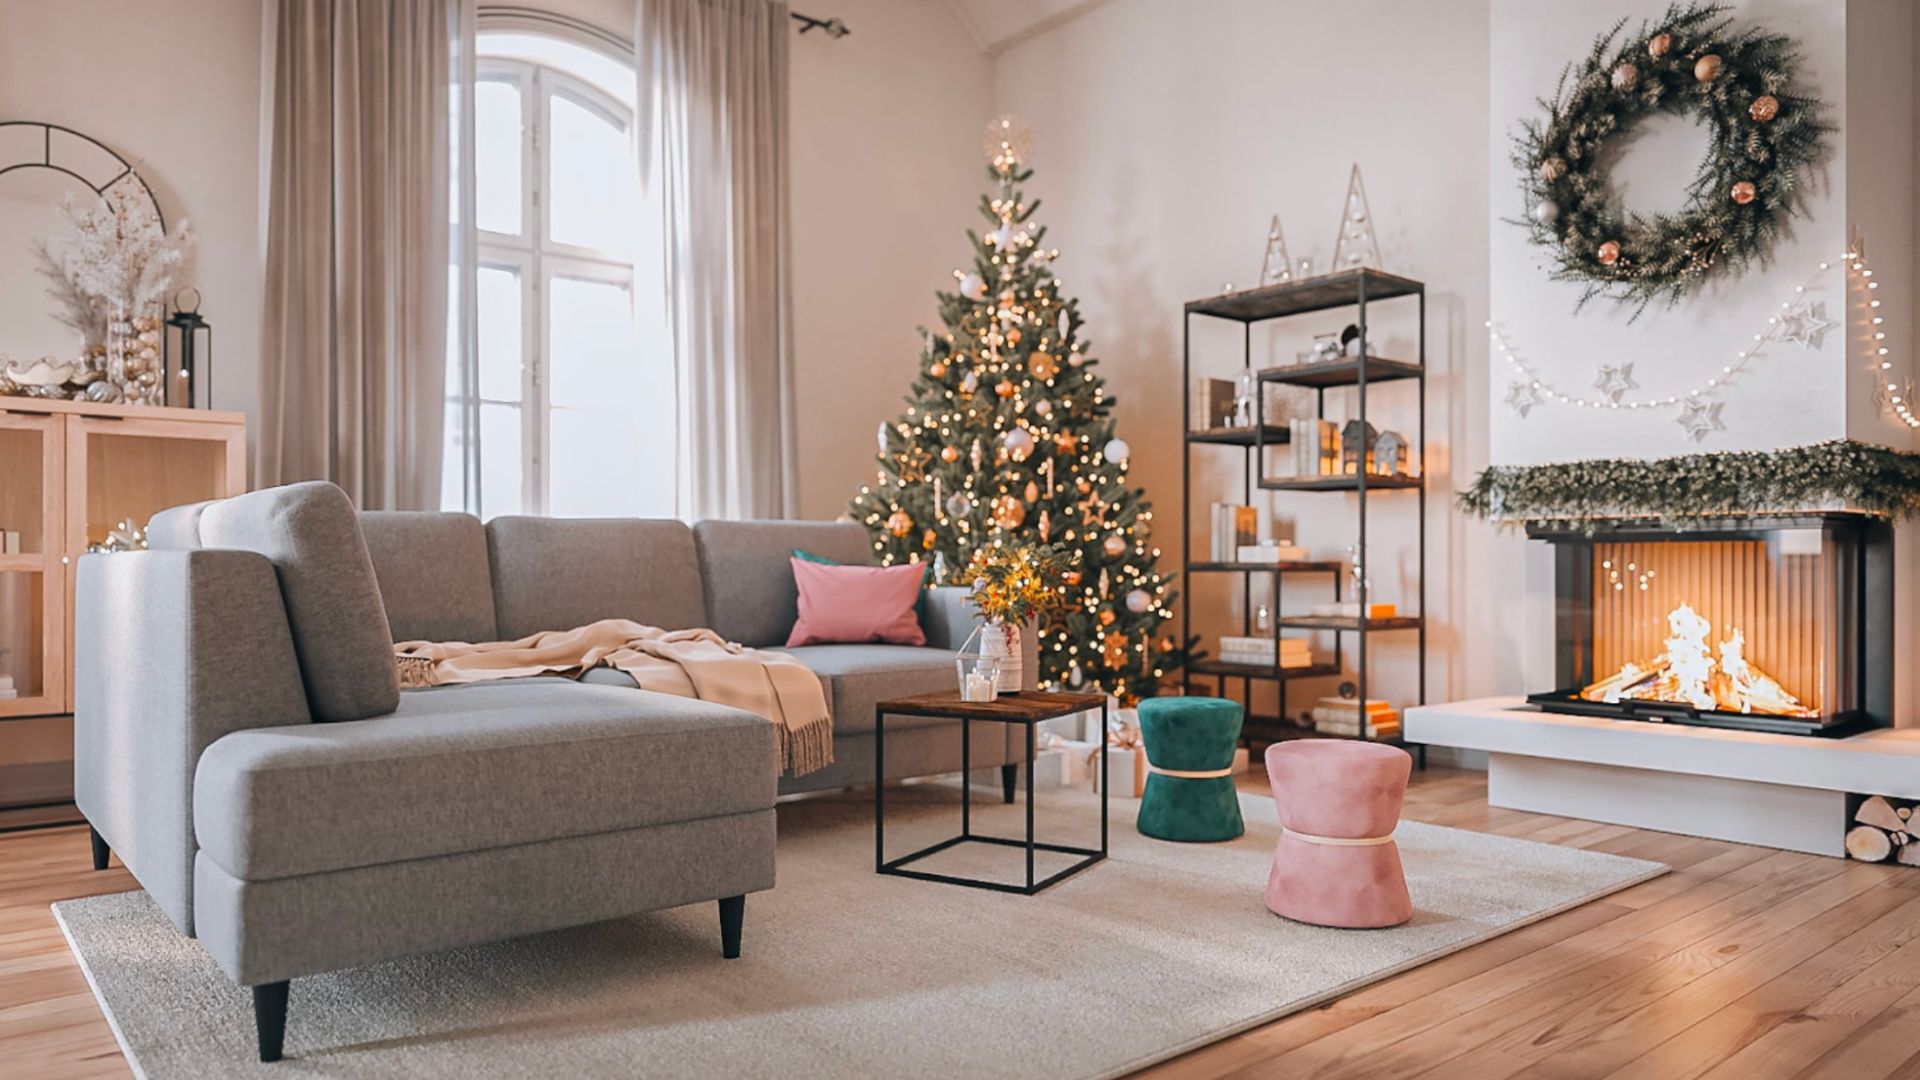 Furniture and Christmas Decor in 3D Rendering